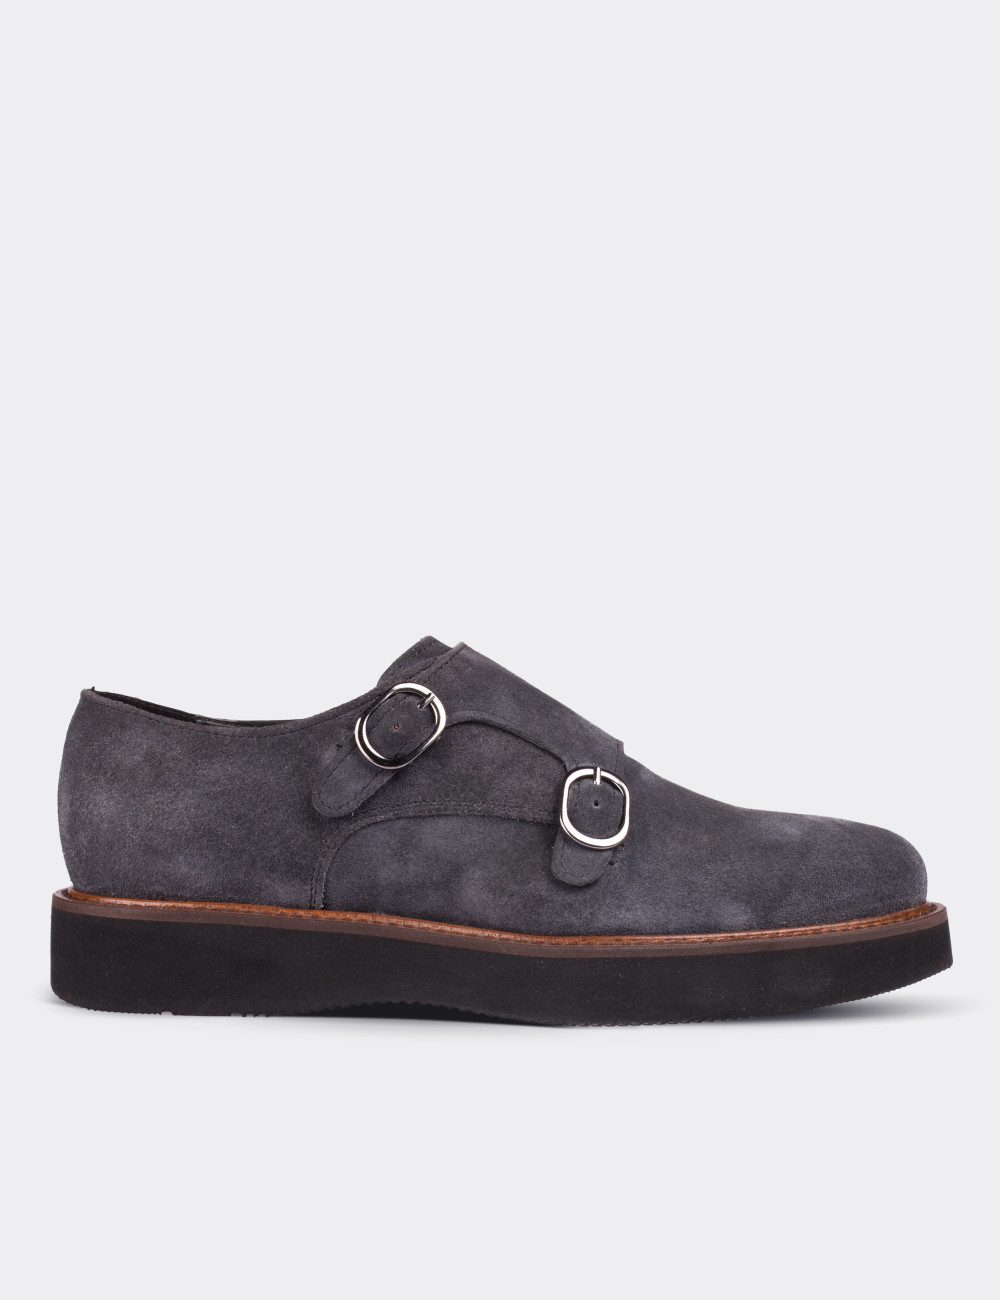 Gray Suede Leather Monk Straps - 01614ZGRIE01